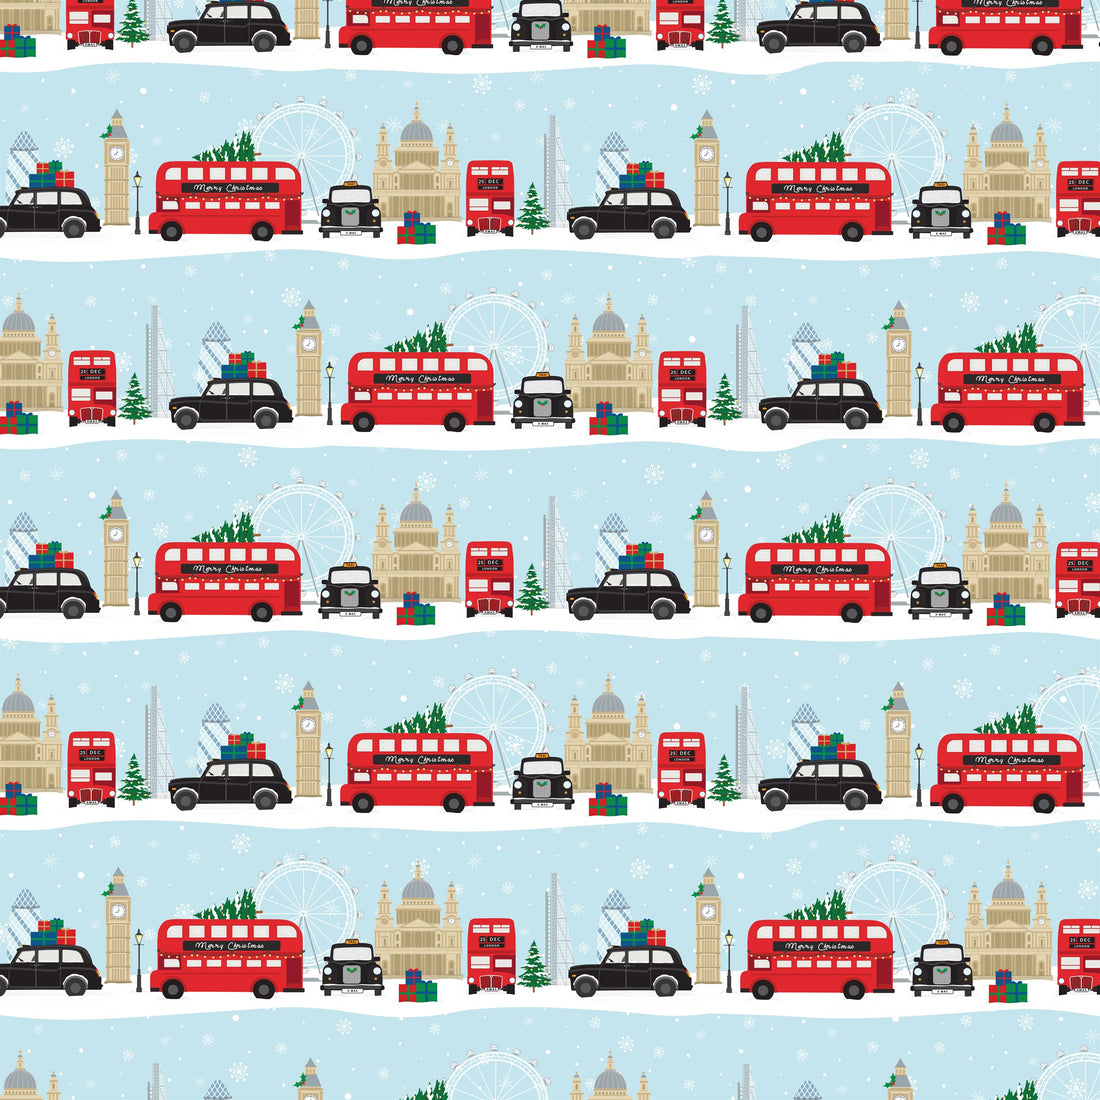 London scene wrapping paper